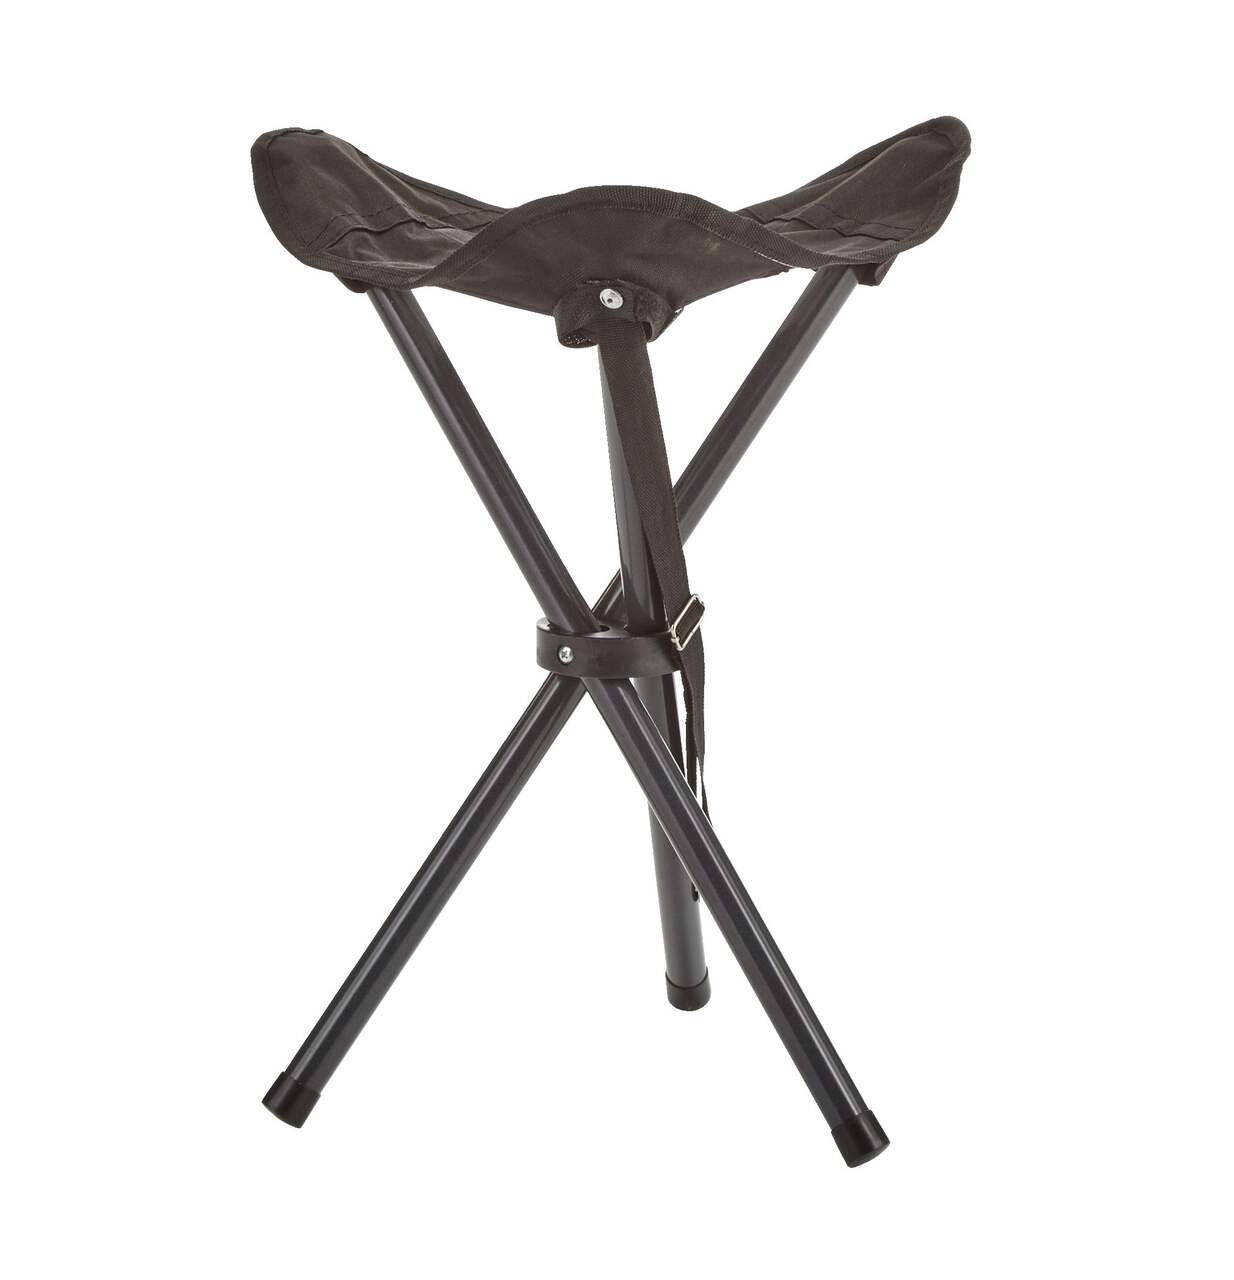 Outbound Outdoor Portable Folding 16.5-In Tripod Camping Stool, Supports  225 Lbs, Assorted